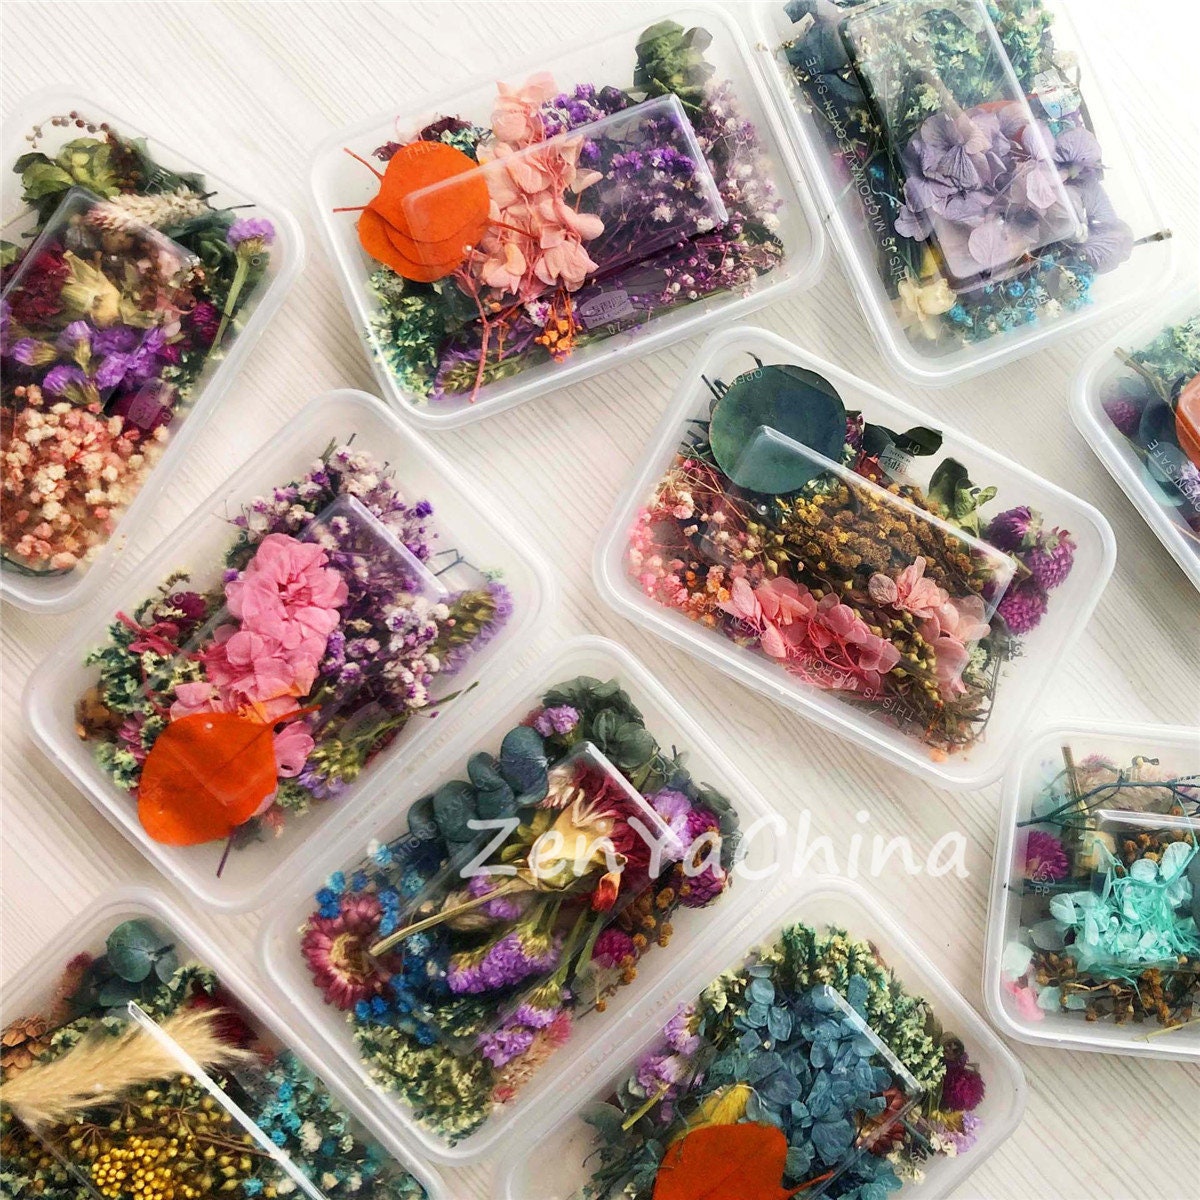 Pressed Flowers Pack, Dry Flowers for Resin Art, DIY Dried Flowers Specimen  Art Crafting, Silicone Mold Filler, DIY Resin Art Project 